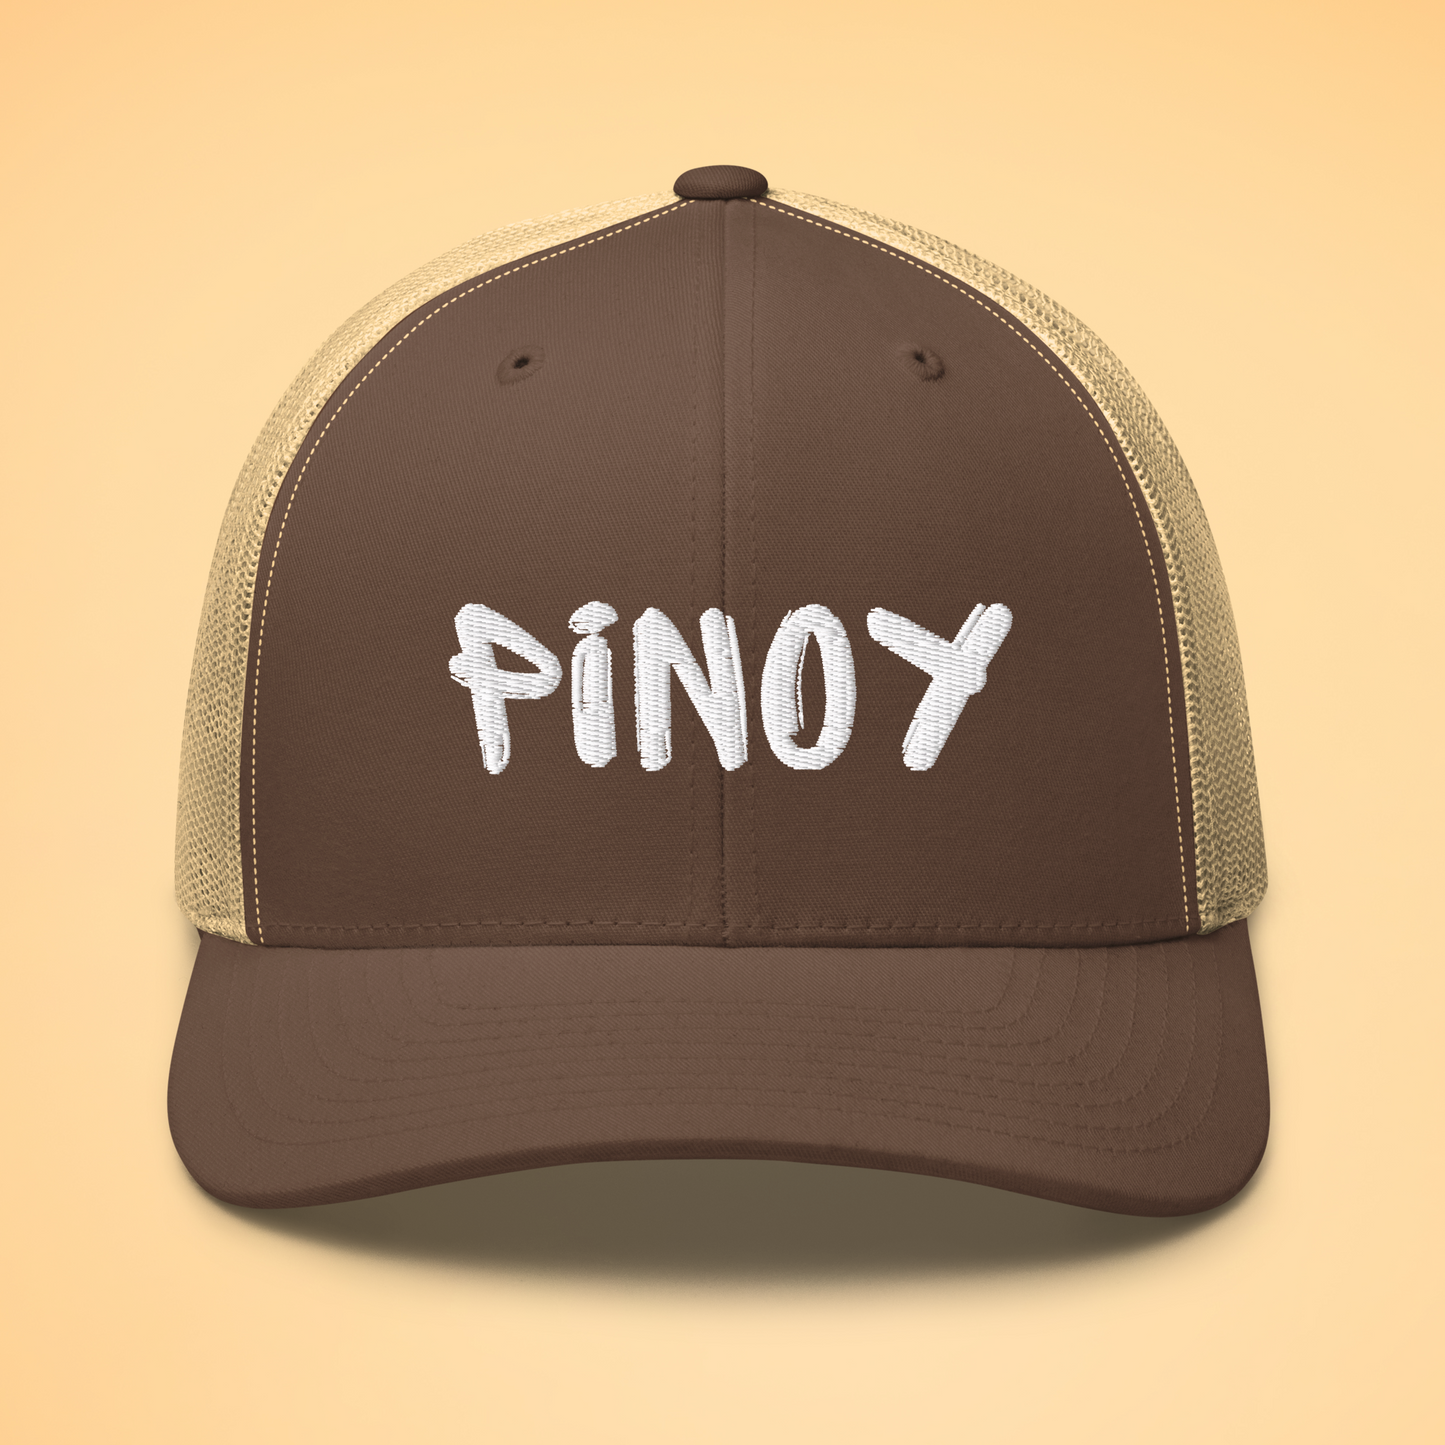 Filipino Pinoy Embroidered Mesh Back Trucker Cap in Brown